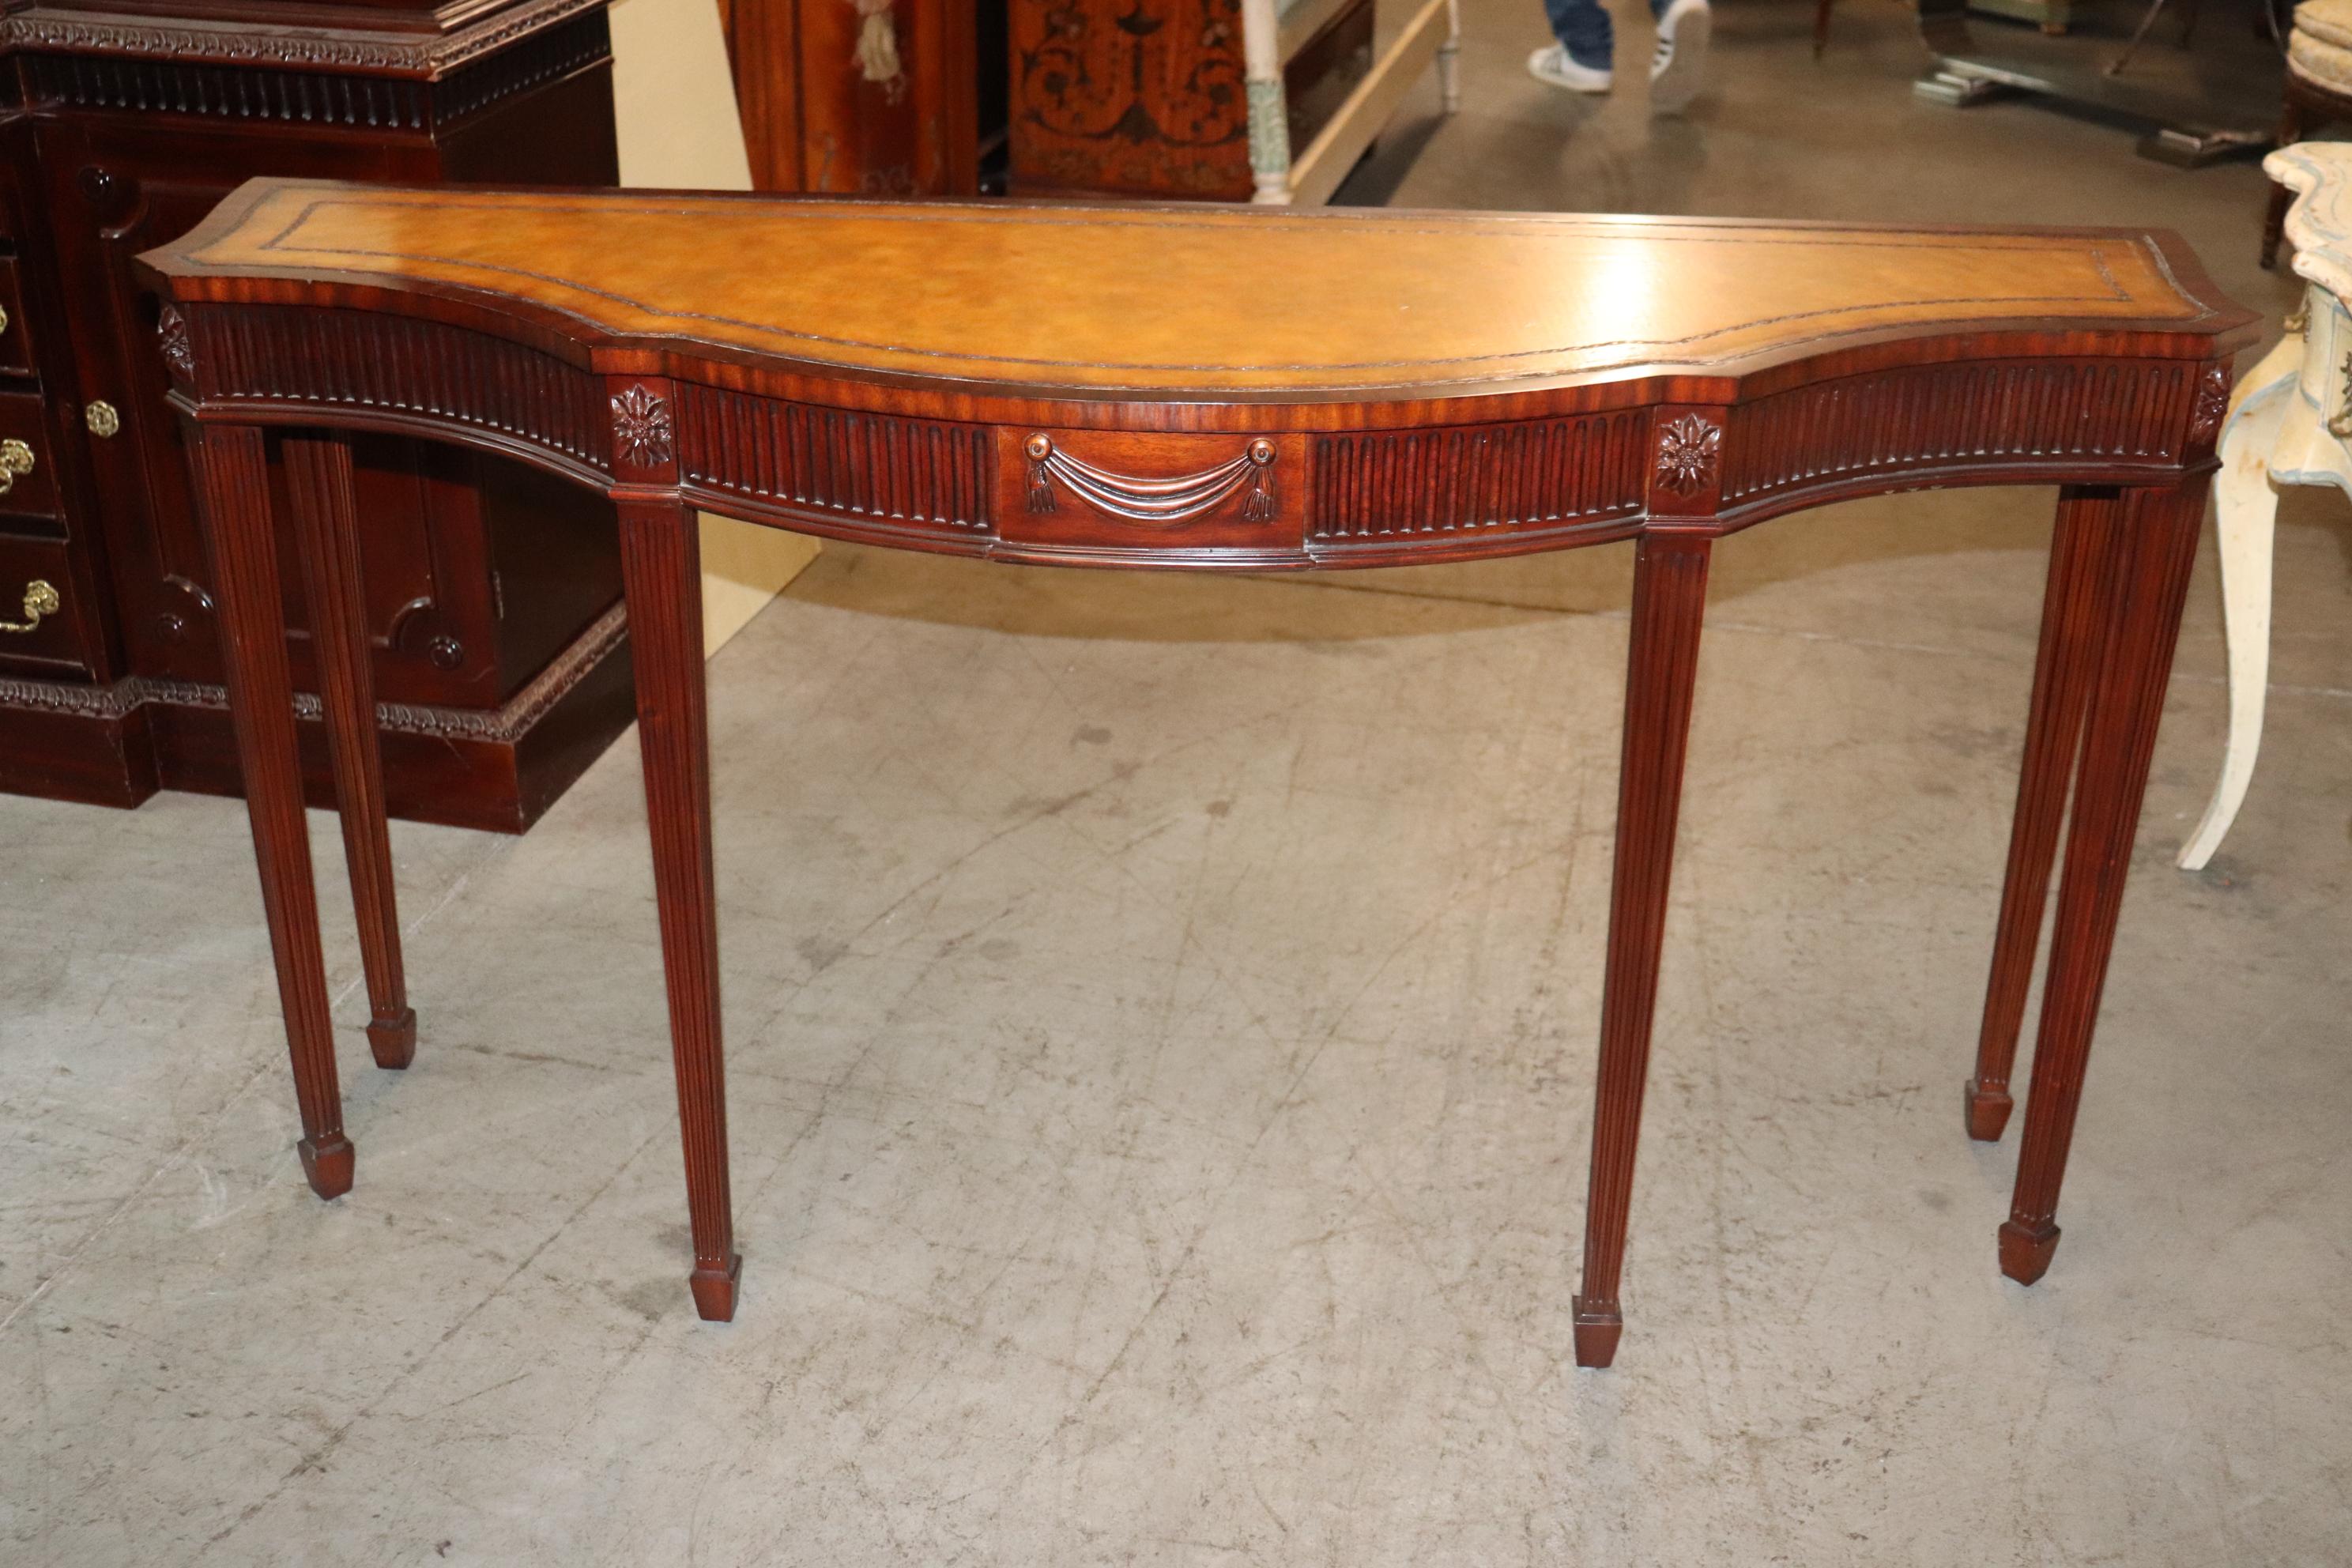 This is a superb Maitland Smith Leather top console table with a solid mahogany frame in very good vintage condition dating to teh 1990-2000s era. The table is beautifully carved and the leather top is in very good condition and needs nothing to be